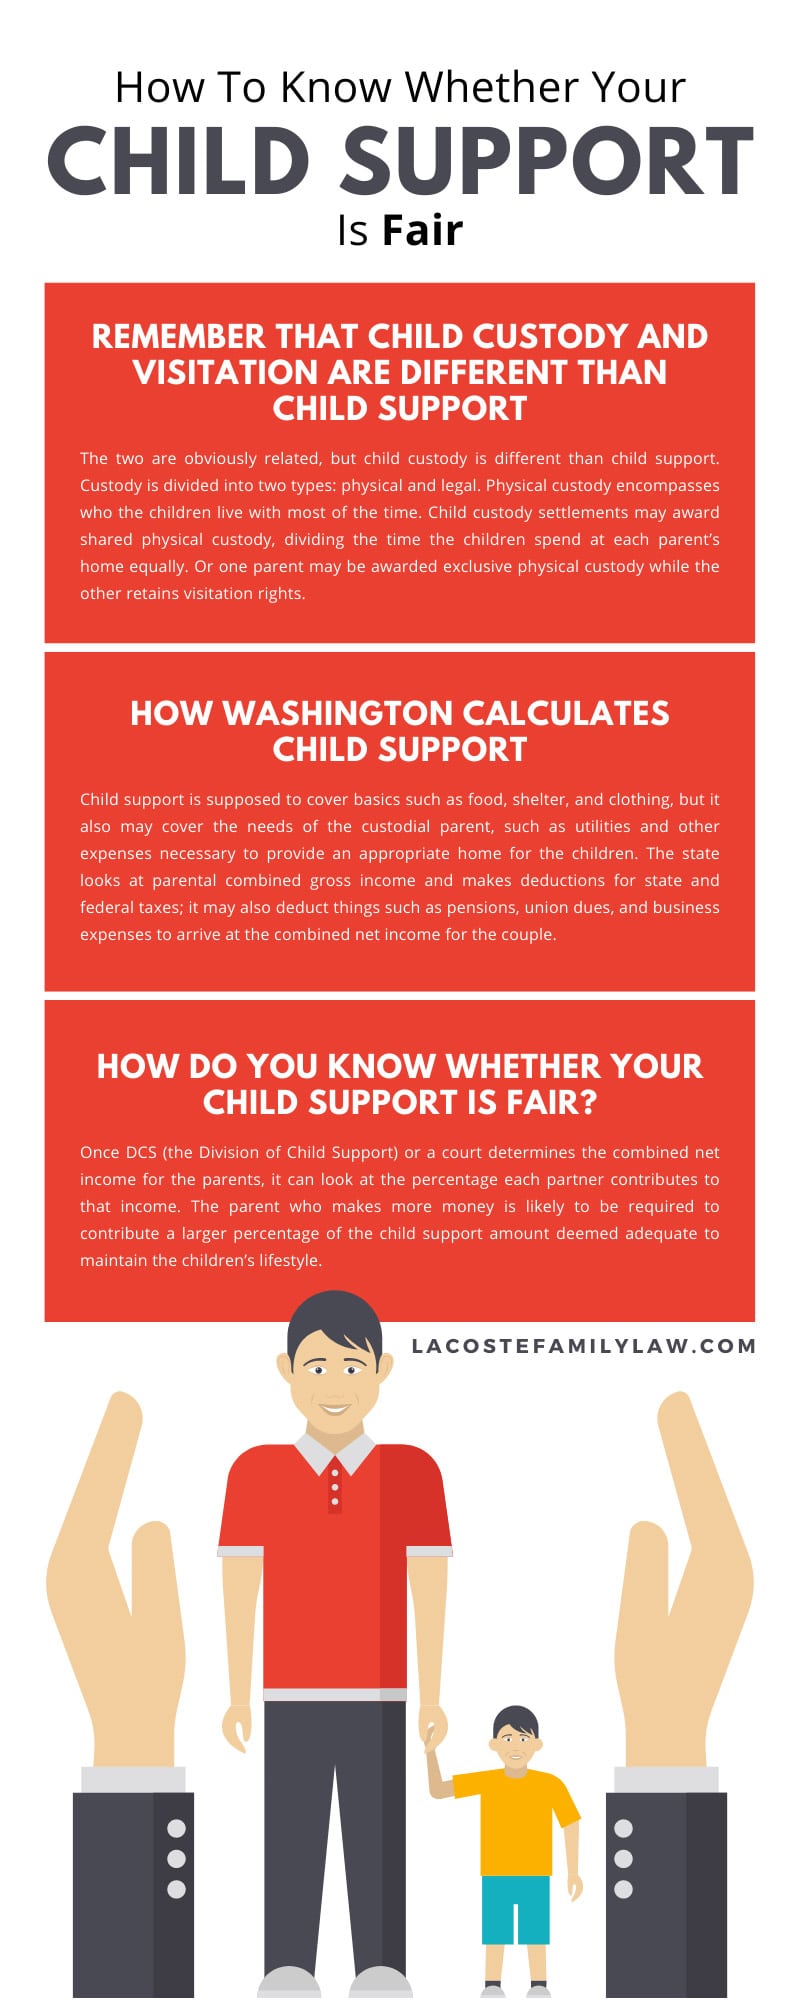 How To Know Whether Your Child Support Is Fair